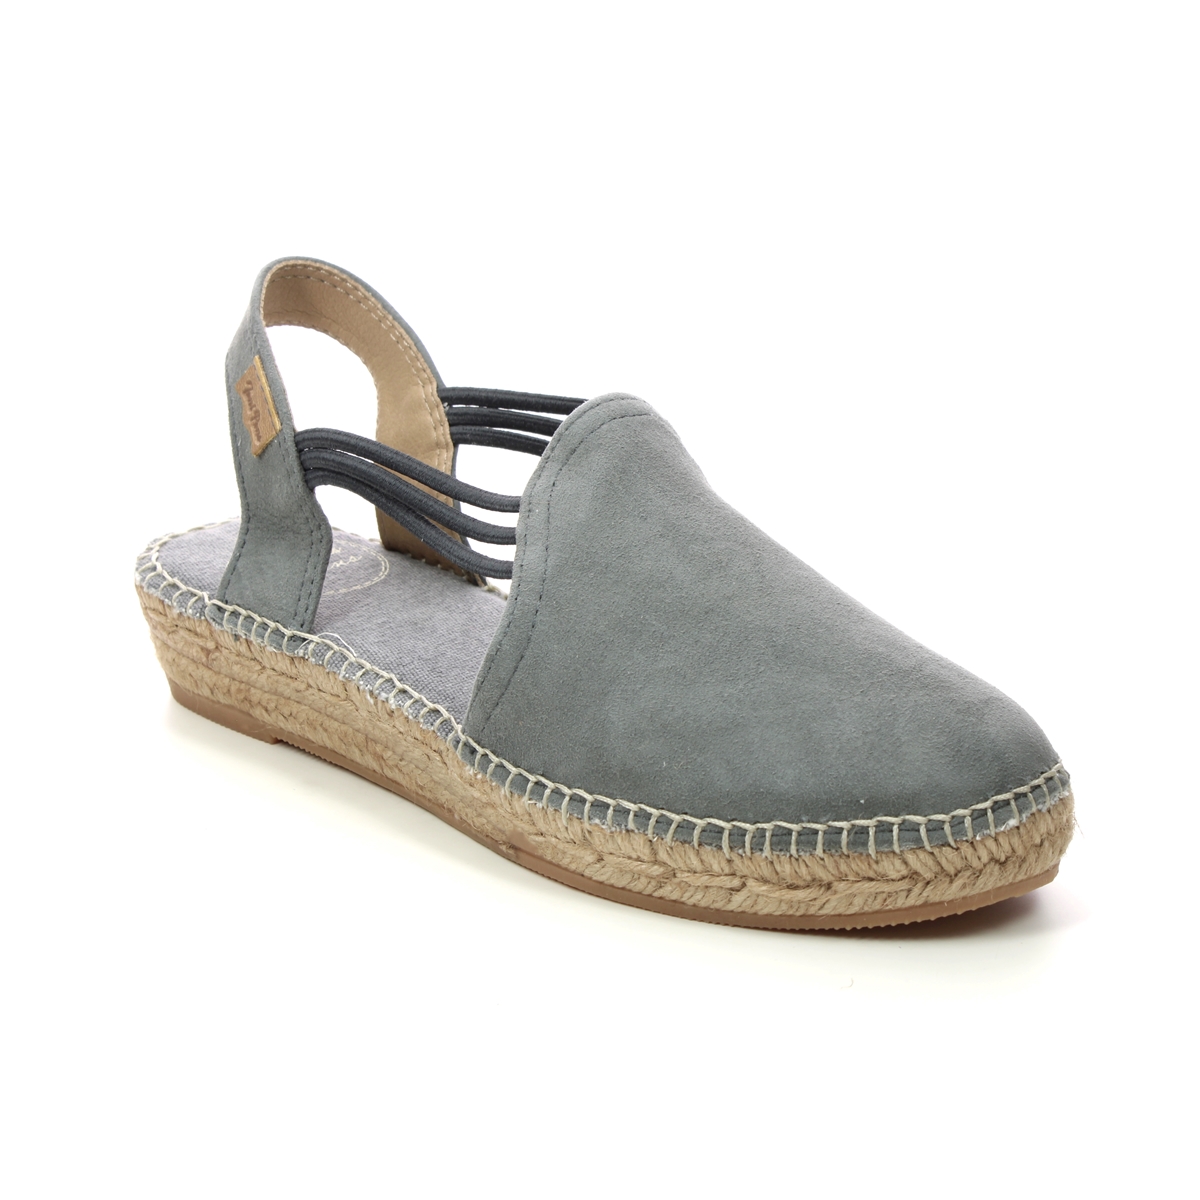 Toni Pons Nuria In Grey Suede 0110-03 In Size 38 In Plain Grey Suede